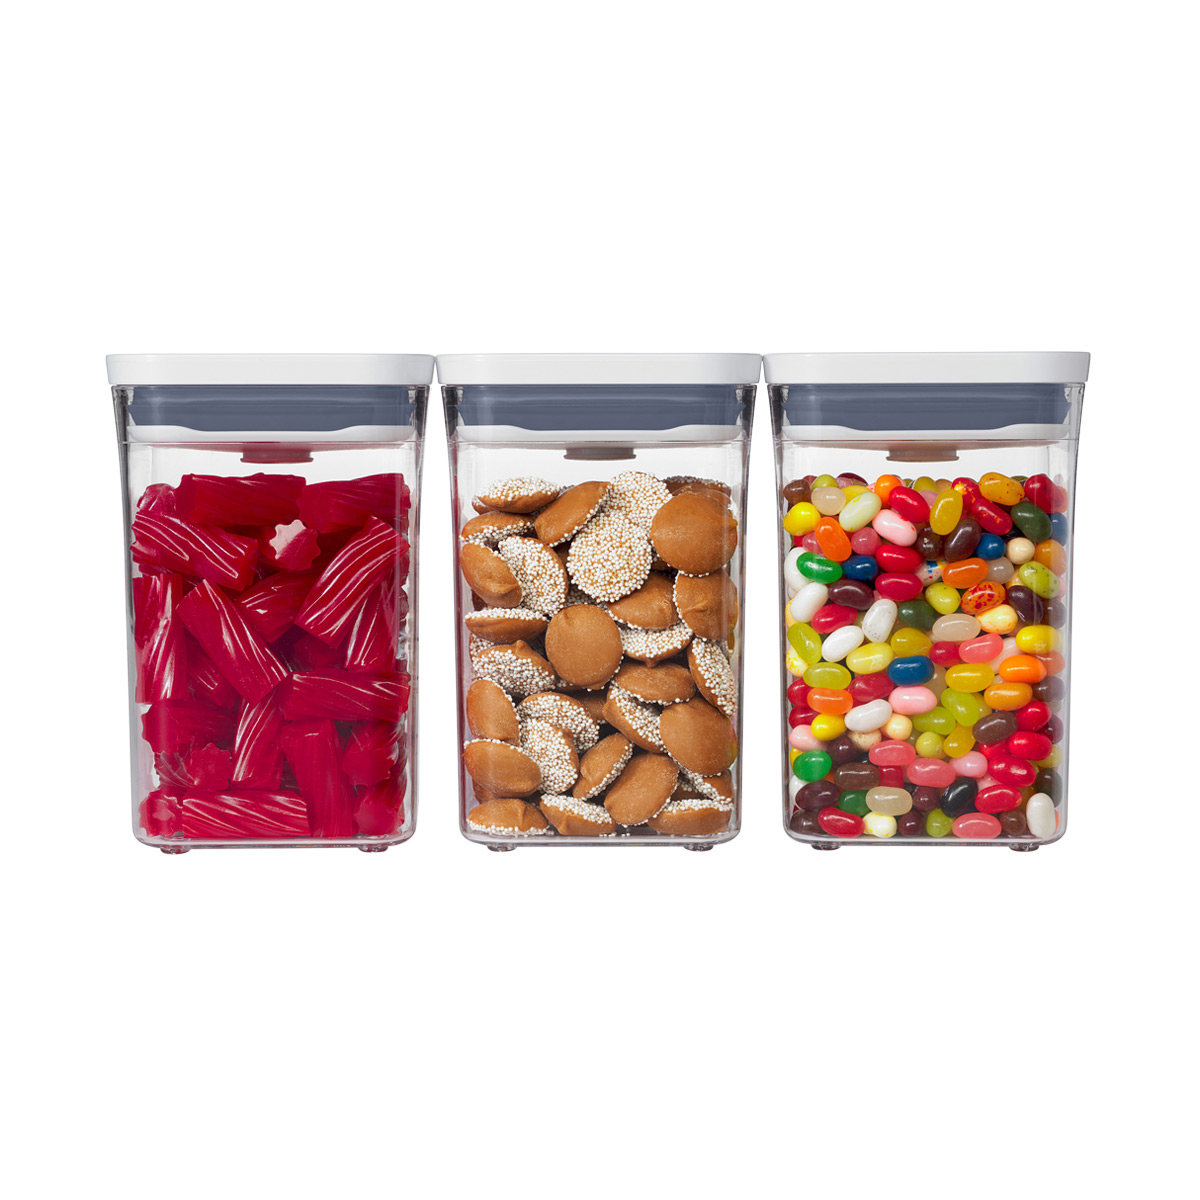 https://www.containerstore.com/catalogimages/369163/10078018-OXO-3-piece-POP-Container-S.jpg